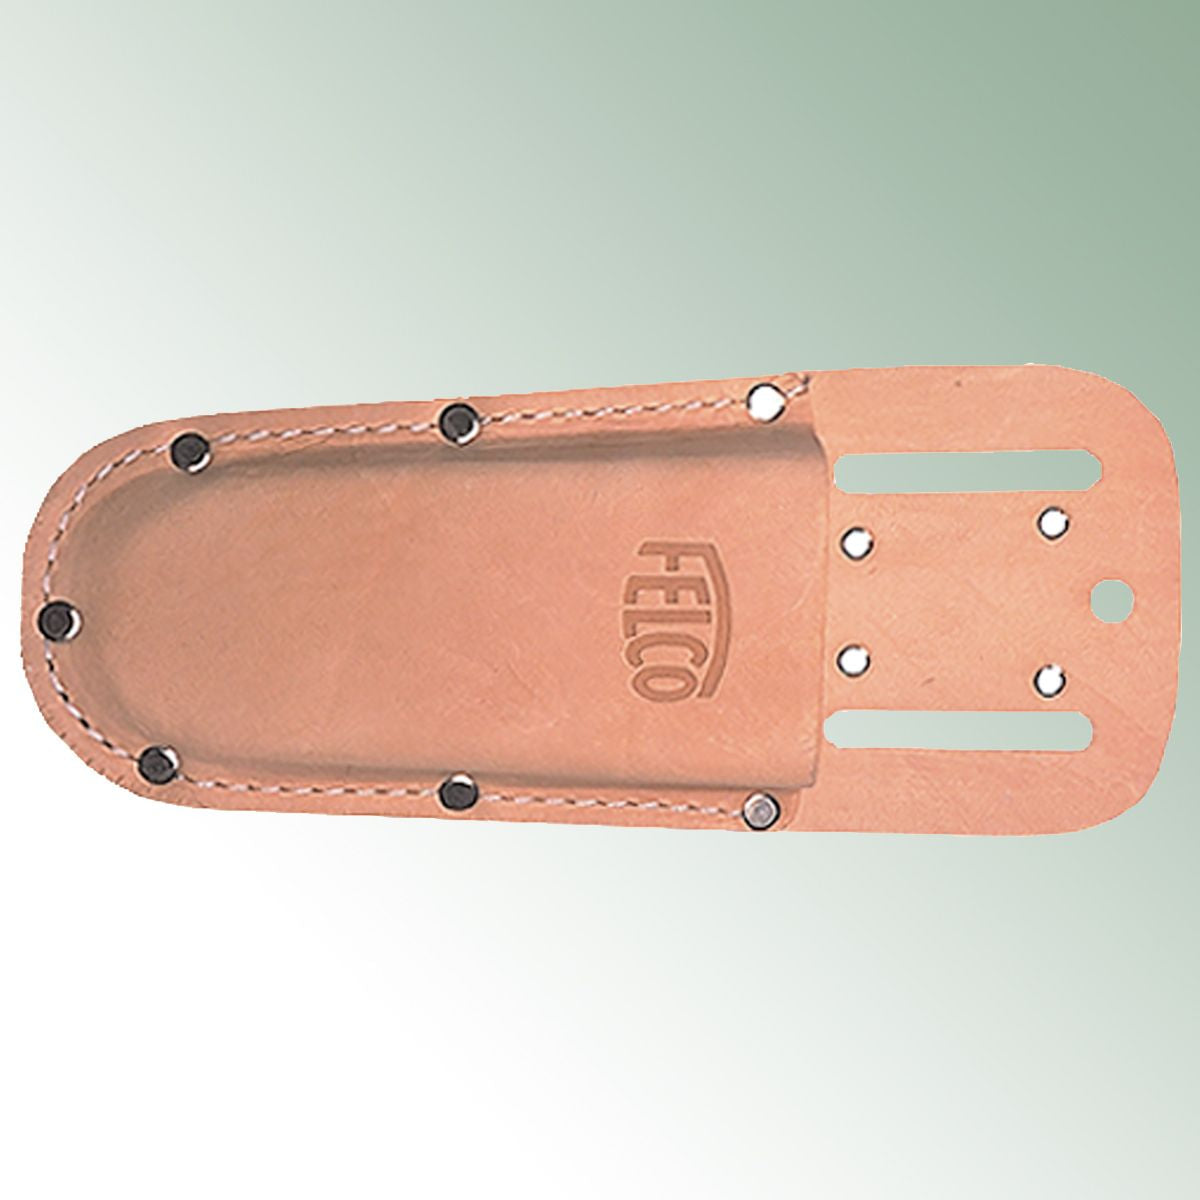 Felco Leather Holster No. 910 for Secateurs